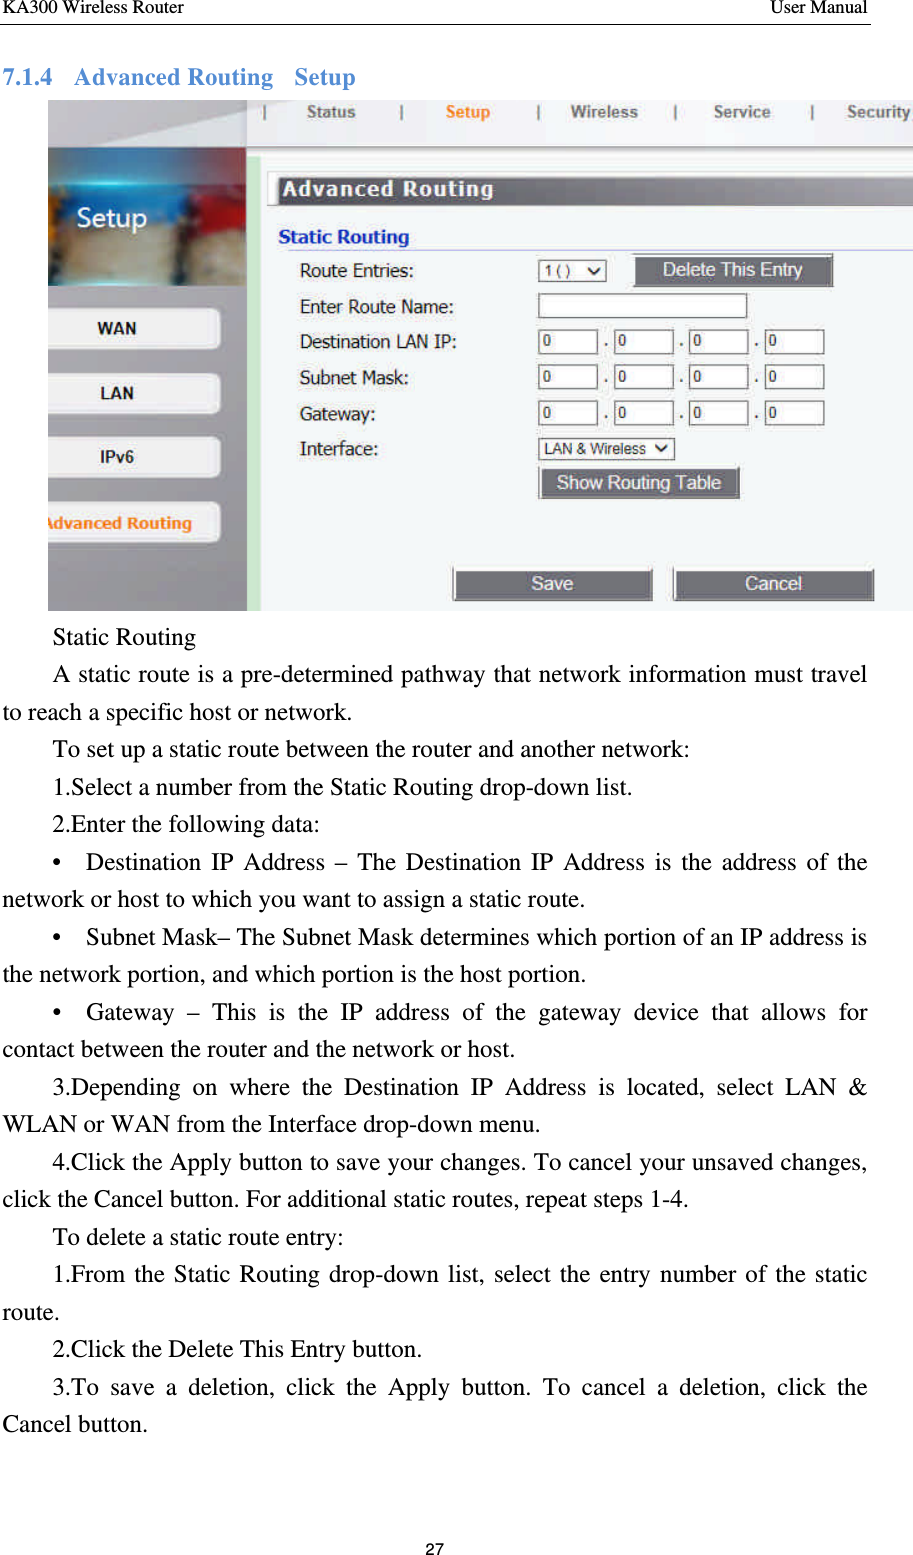 KA300 Wireless Router       User Manual 27  7.1.4  Advanced Routing  Setup  Static Routing A static route is a pre-determined pathway that network information must travel to reach a specific host or network.   To set up a static route between the router and another network:    1.Select a number from the Static Routing drop-down list. 2.Enter the following data: •  Destination IP Address – The Destination IP Address is the address of the network or host to which you want to assign a static route. •  Subnet Mask– The Subnet Mask determines which portion of an IP address is the network portion, and which portion is the host portion. •  Gateway  – This is the IP address of the gateway device that allows for contact between the router and the network or host. 3.Depending on where the Destination IP Address is located, select LAN &amp; WLAN or WAN from the Interface drop-down menu. 4.Click the Apply button to save your changes. To cancel your unsaved changes, click the Cancel button. For additional static routes, repeat steps 1-4.    To delete a static route entry: 1.From the Static Routing drop-down list, select the entry number of the static route. 2.Click the Delete This Entry button. 3.To save a deletion, click the Apply button. To cancel a deletion, click the Cancel button.  